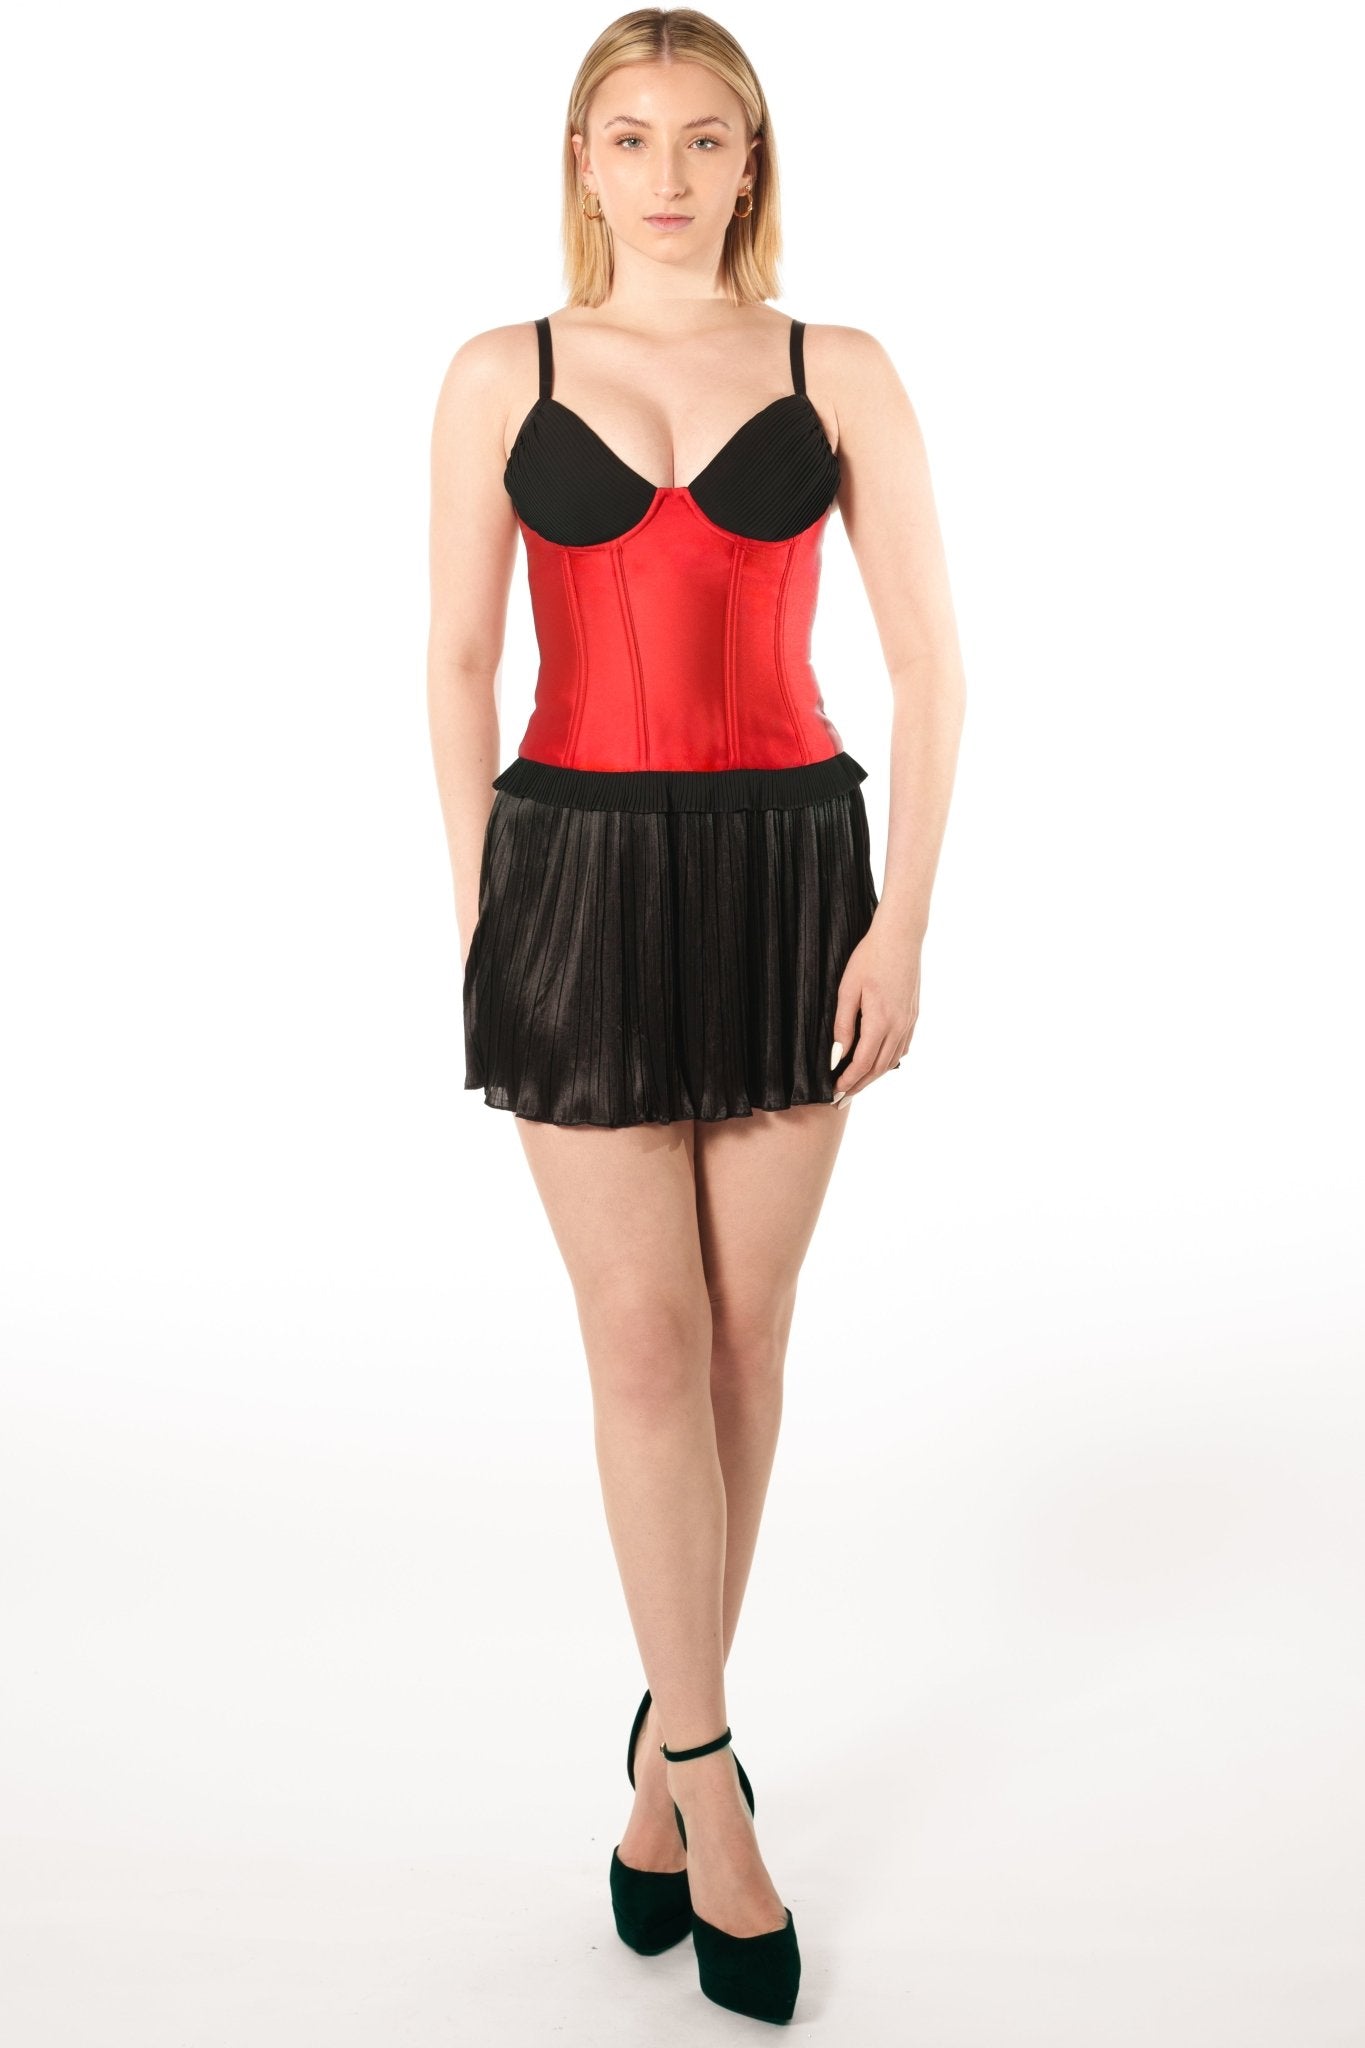 POLY Bustier Corset Uniform Top for cocktail server, hostess, or bartender in the gaming, casino, hotel, restaurant, hospitality, and resort industry. Corset uniform top with satin body with mini-pleated bra and hem. - KAPTVA Apparel